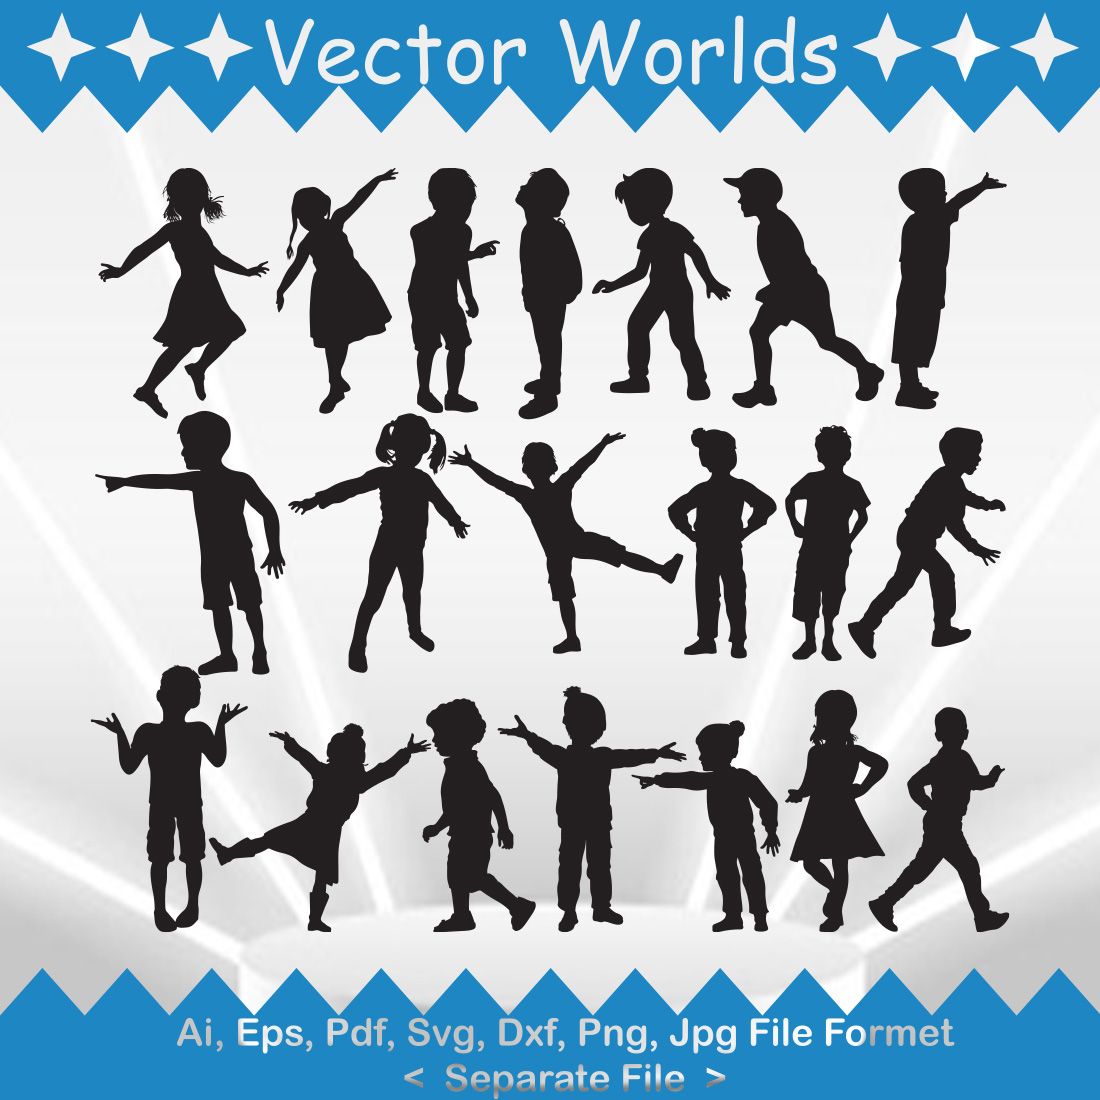 Set of adorable vector images of baby silhouette.